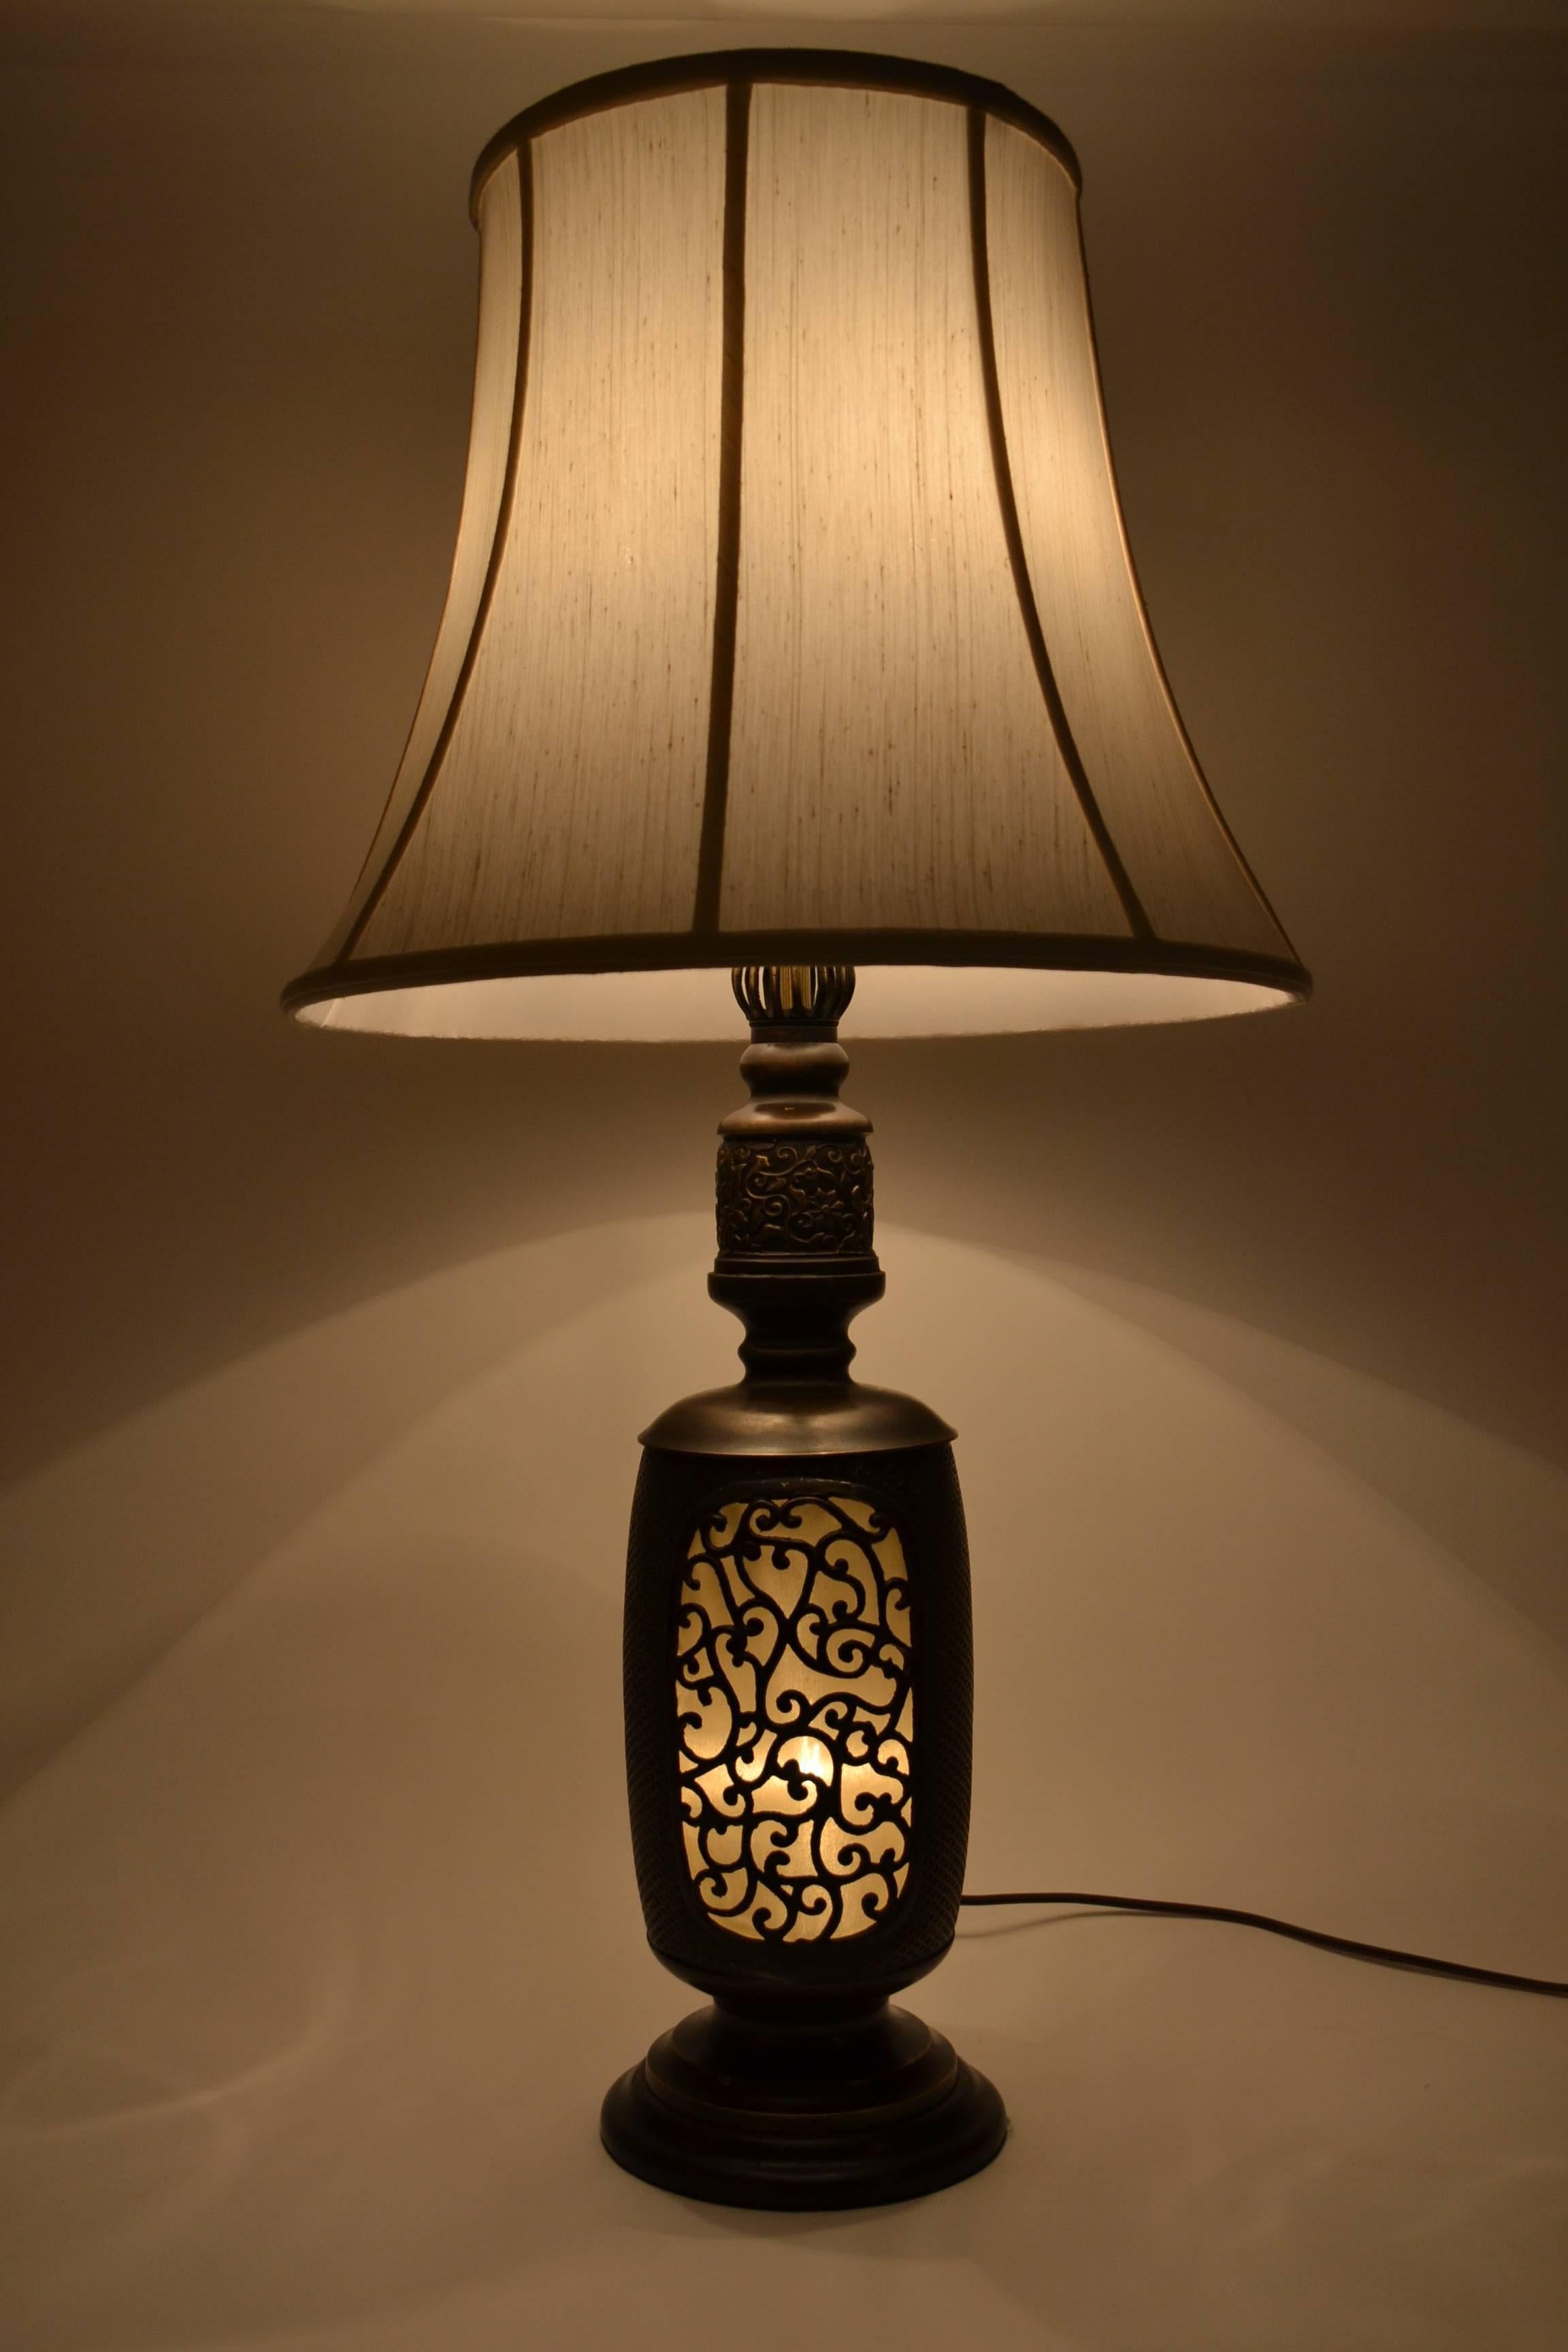 This is a really cool lamp made from an old lantern. The light is wonderful coming through the decorative lantern base.